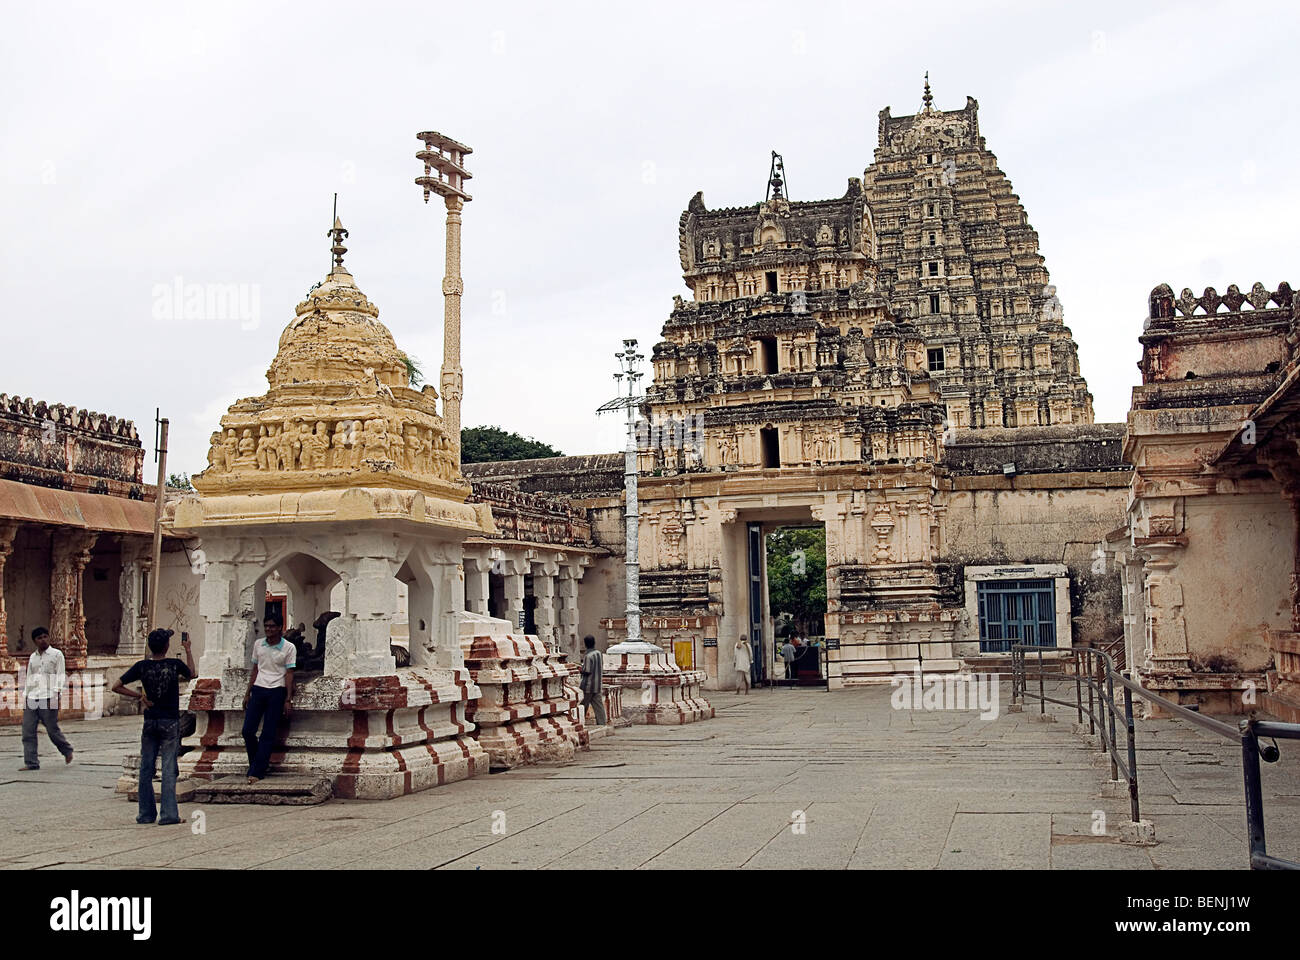 The Virupaksha Temple also called Pampapathi temple is located at the foot of Hemakuta Hill and was rebuilt in 1510 for the Stock Photo